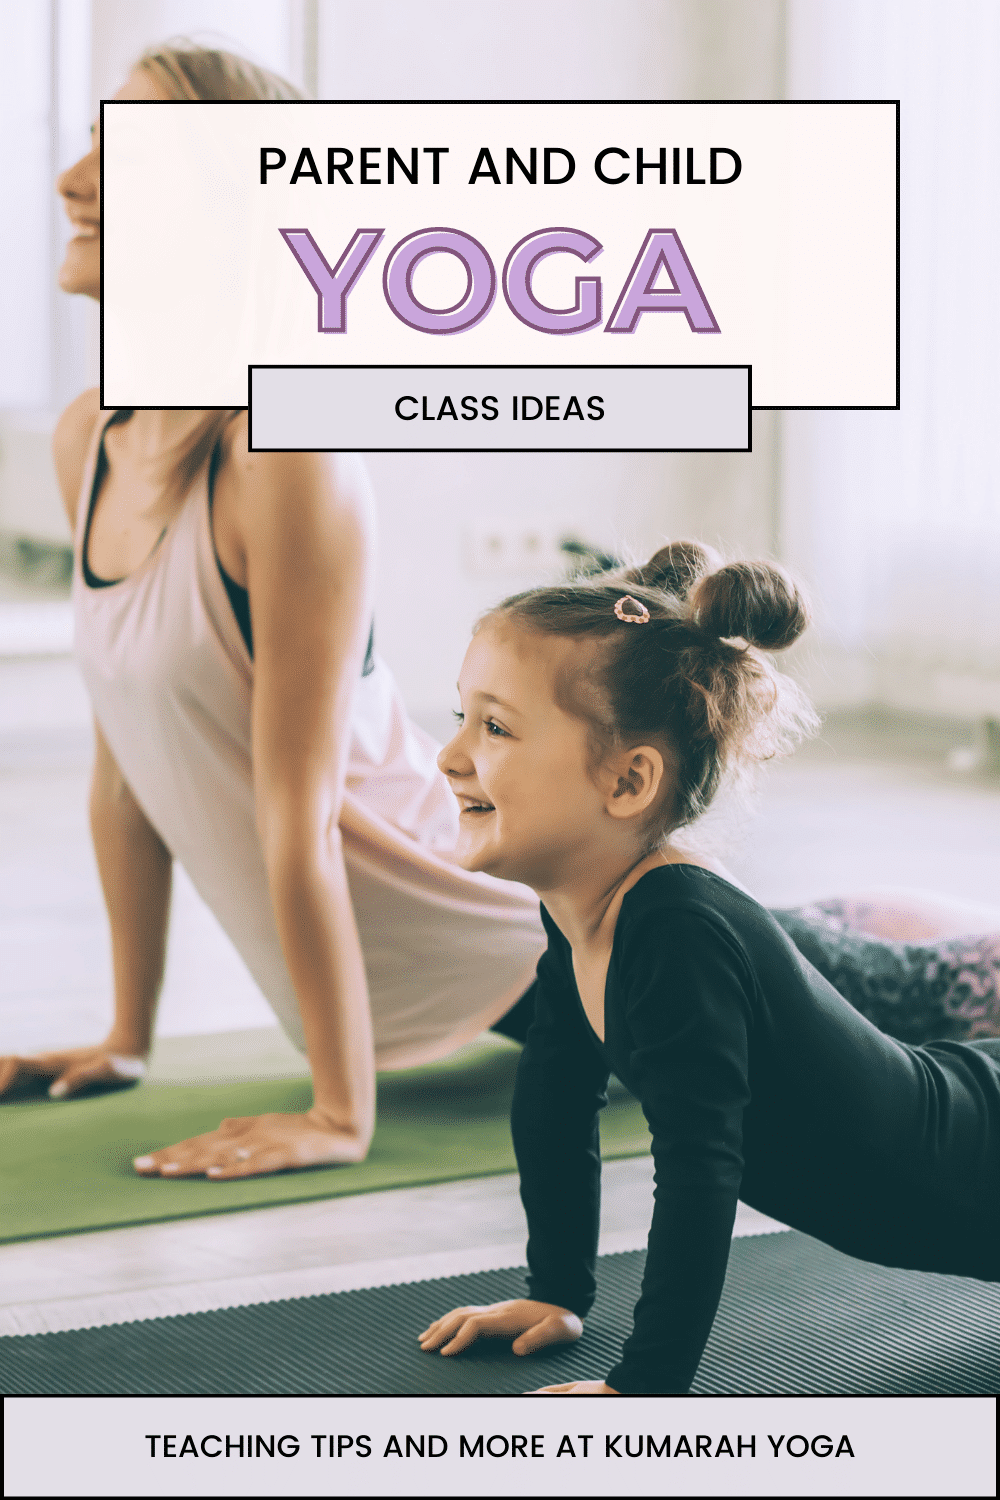 More yoga for teenagers